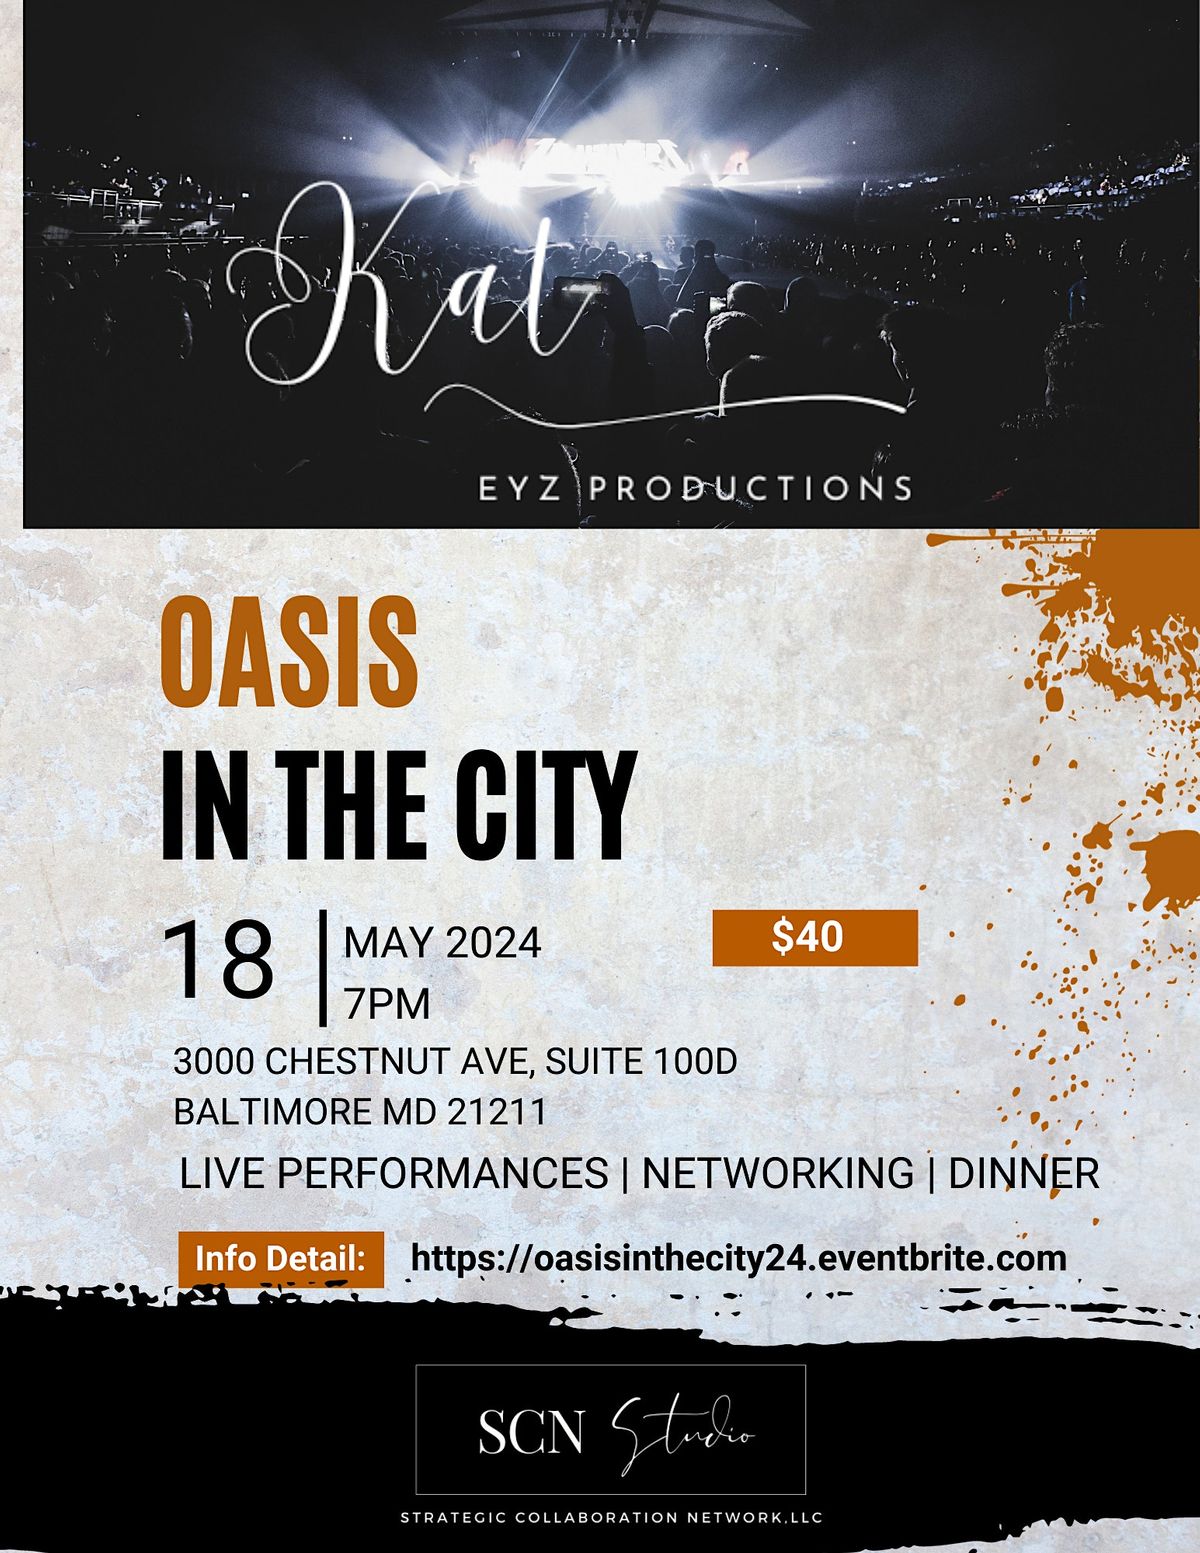 Oasis in the City - Live Performance and Business Networking